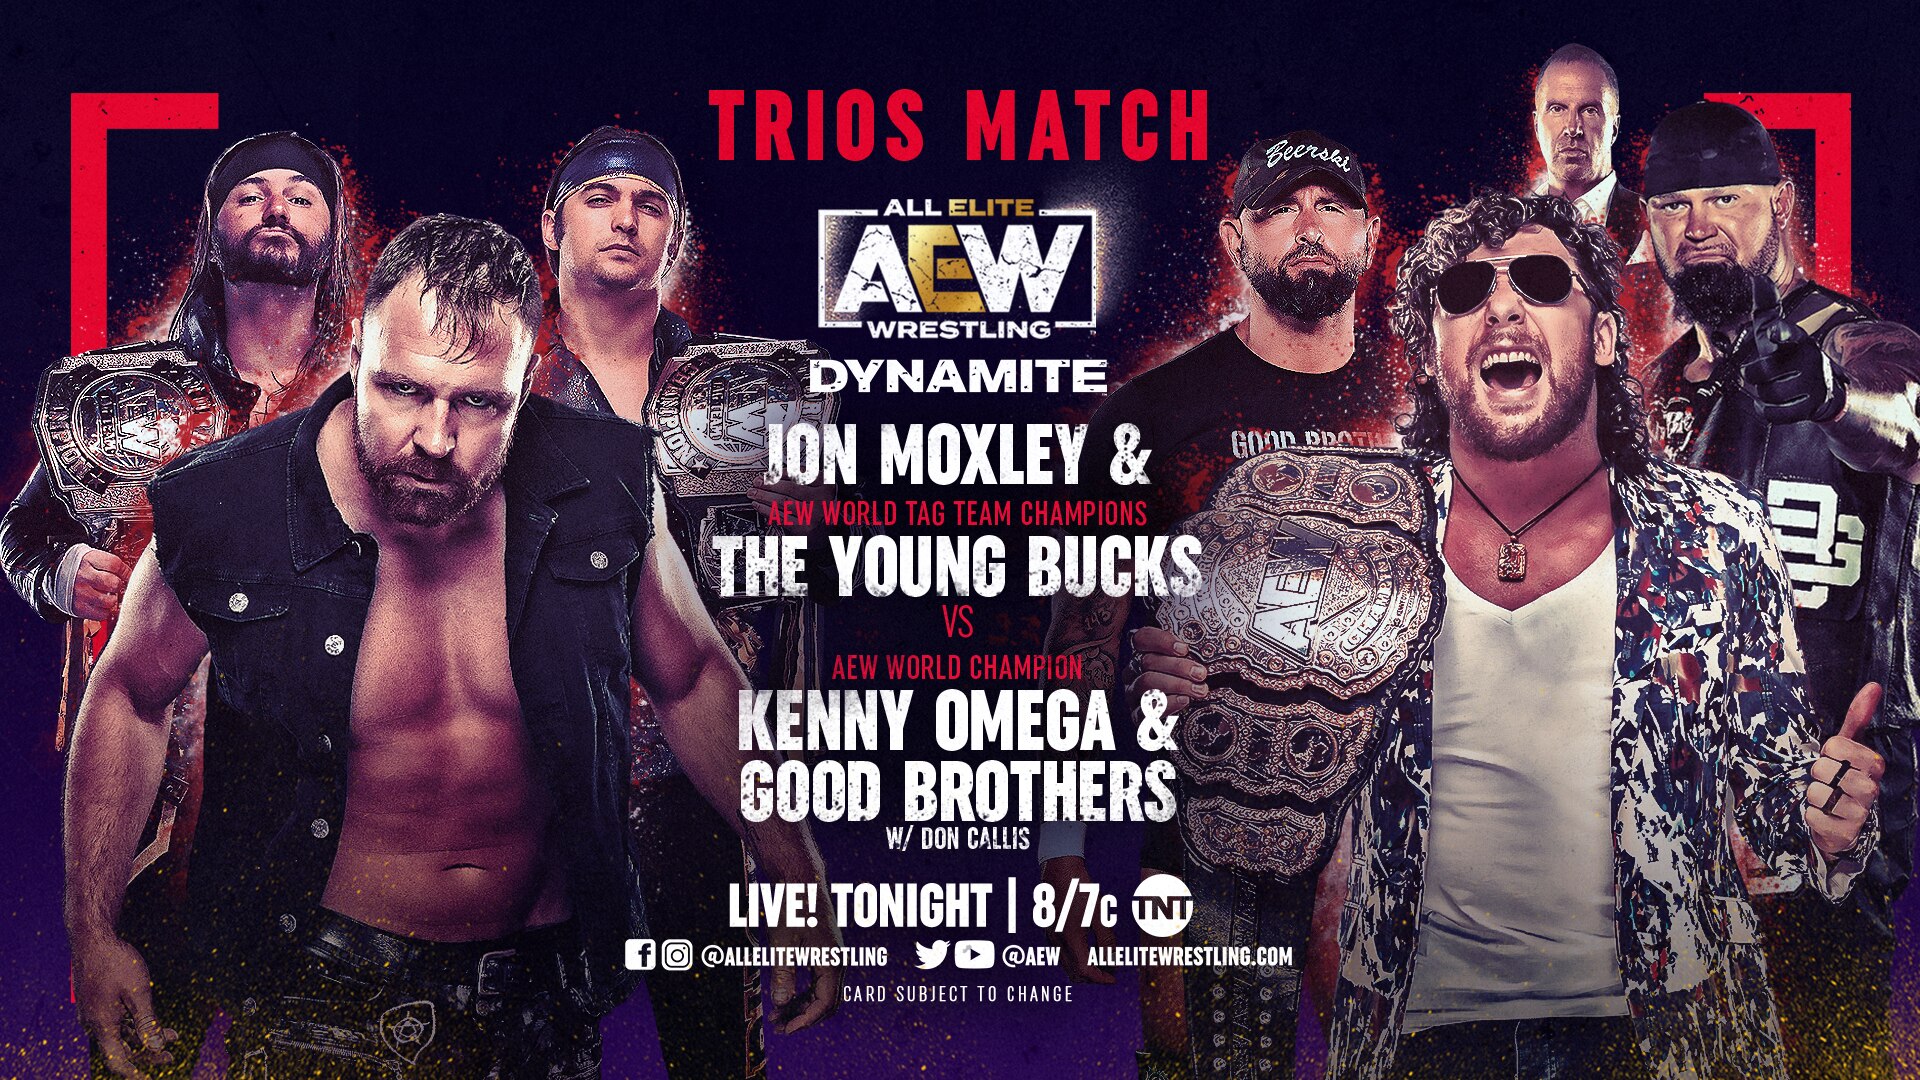 Moxley & Young Bucks vs Kenny Omega & Good Brothers